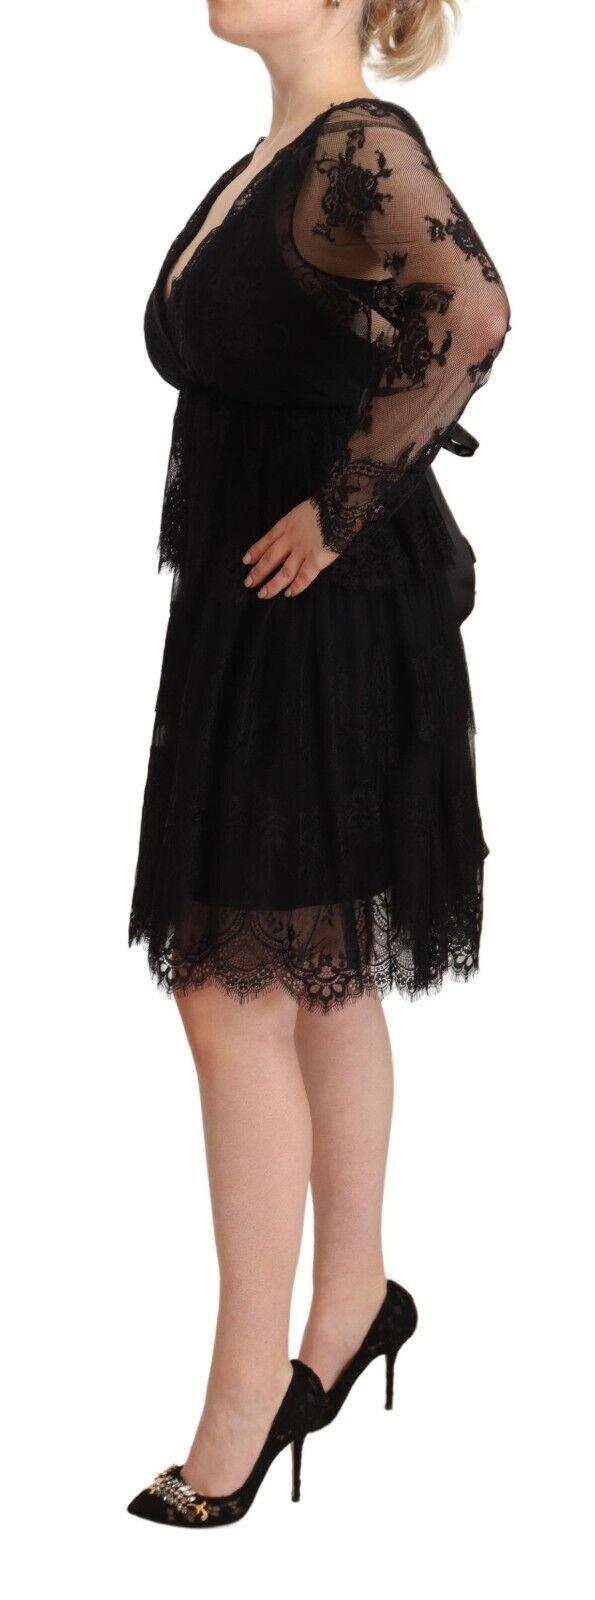 Aniye By Black Floral Lace Cotton Long Sleeves V-neck Shift Dress - Designed by Aniye By Available to Buy at a Discounted Price on Moon Behind The Hill Online Designer Discount Store